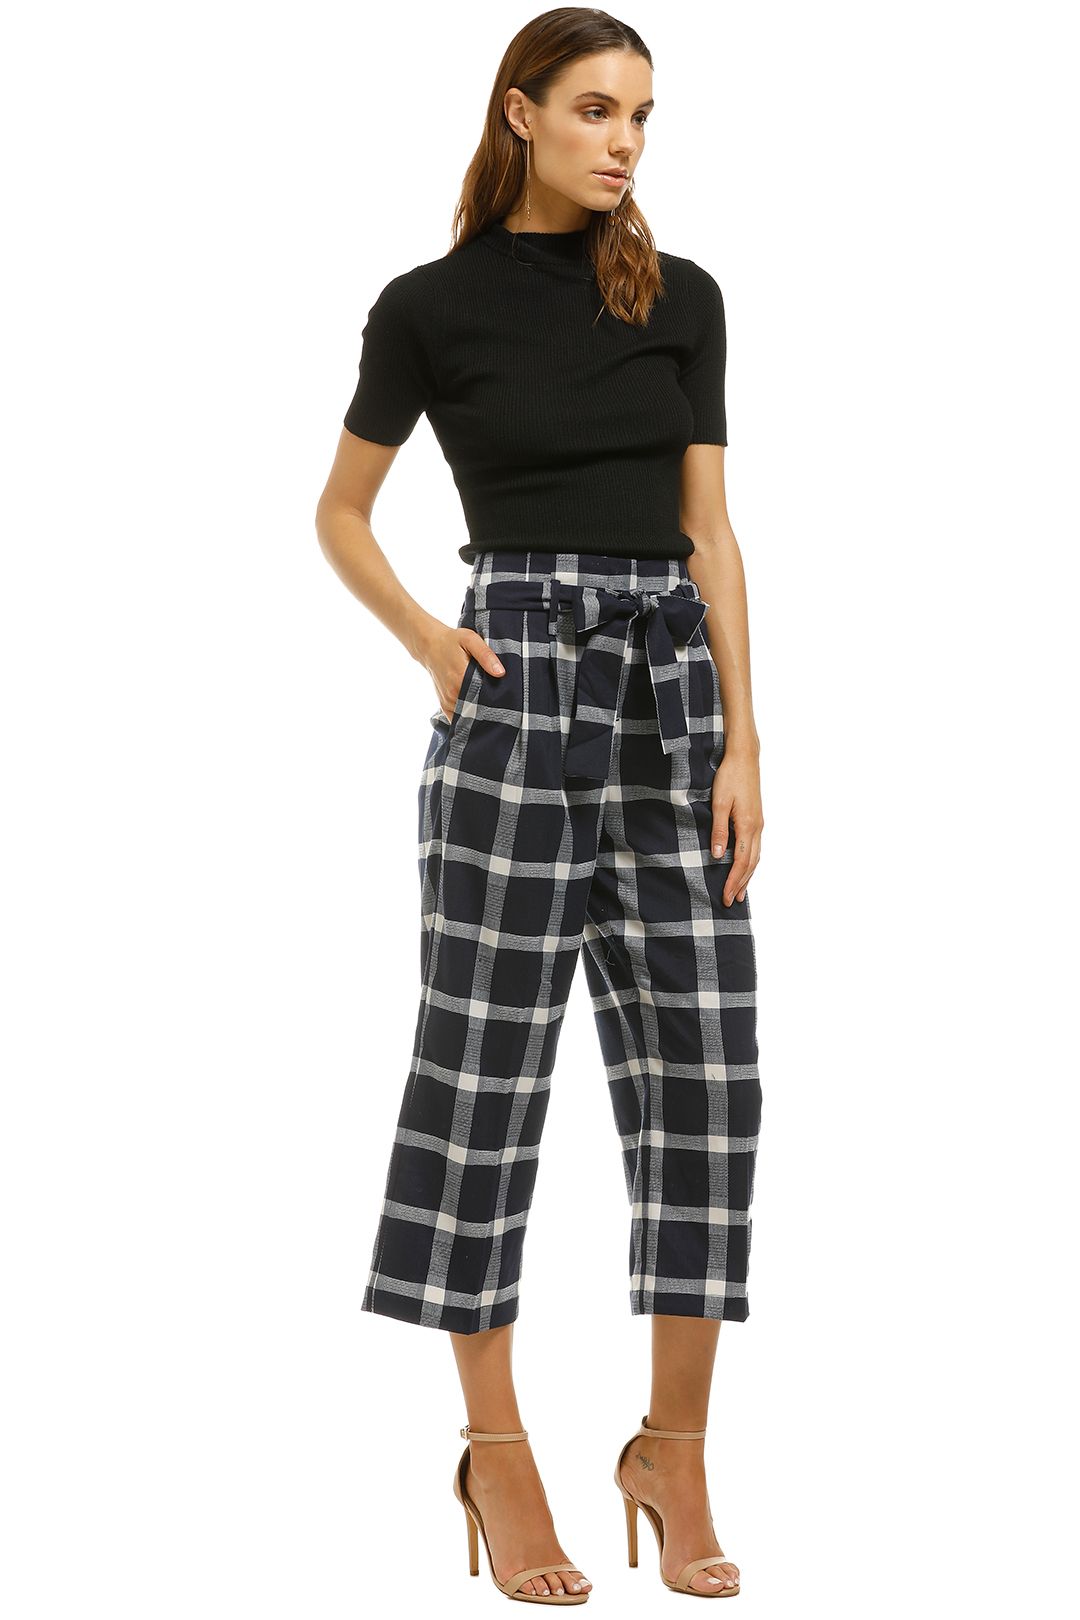 Saints-The-Label-Indiana-Pant-Blue-Check-Side